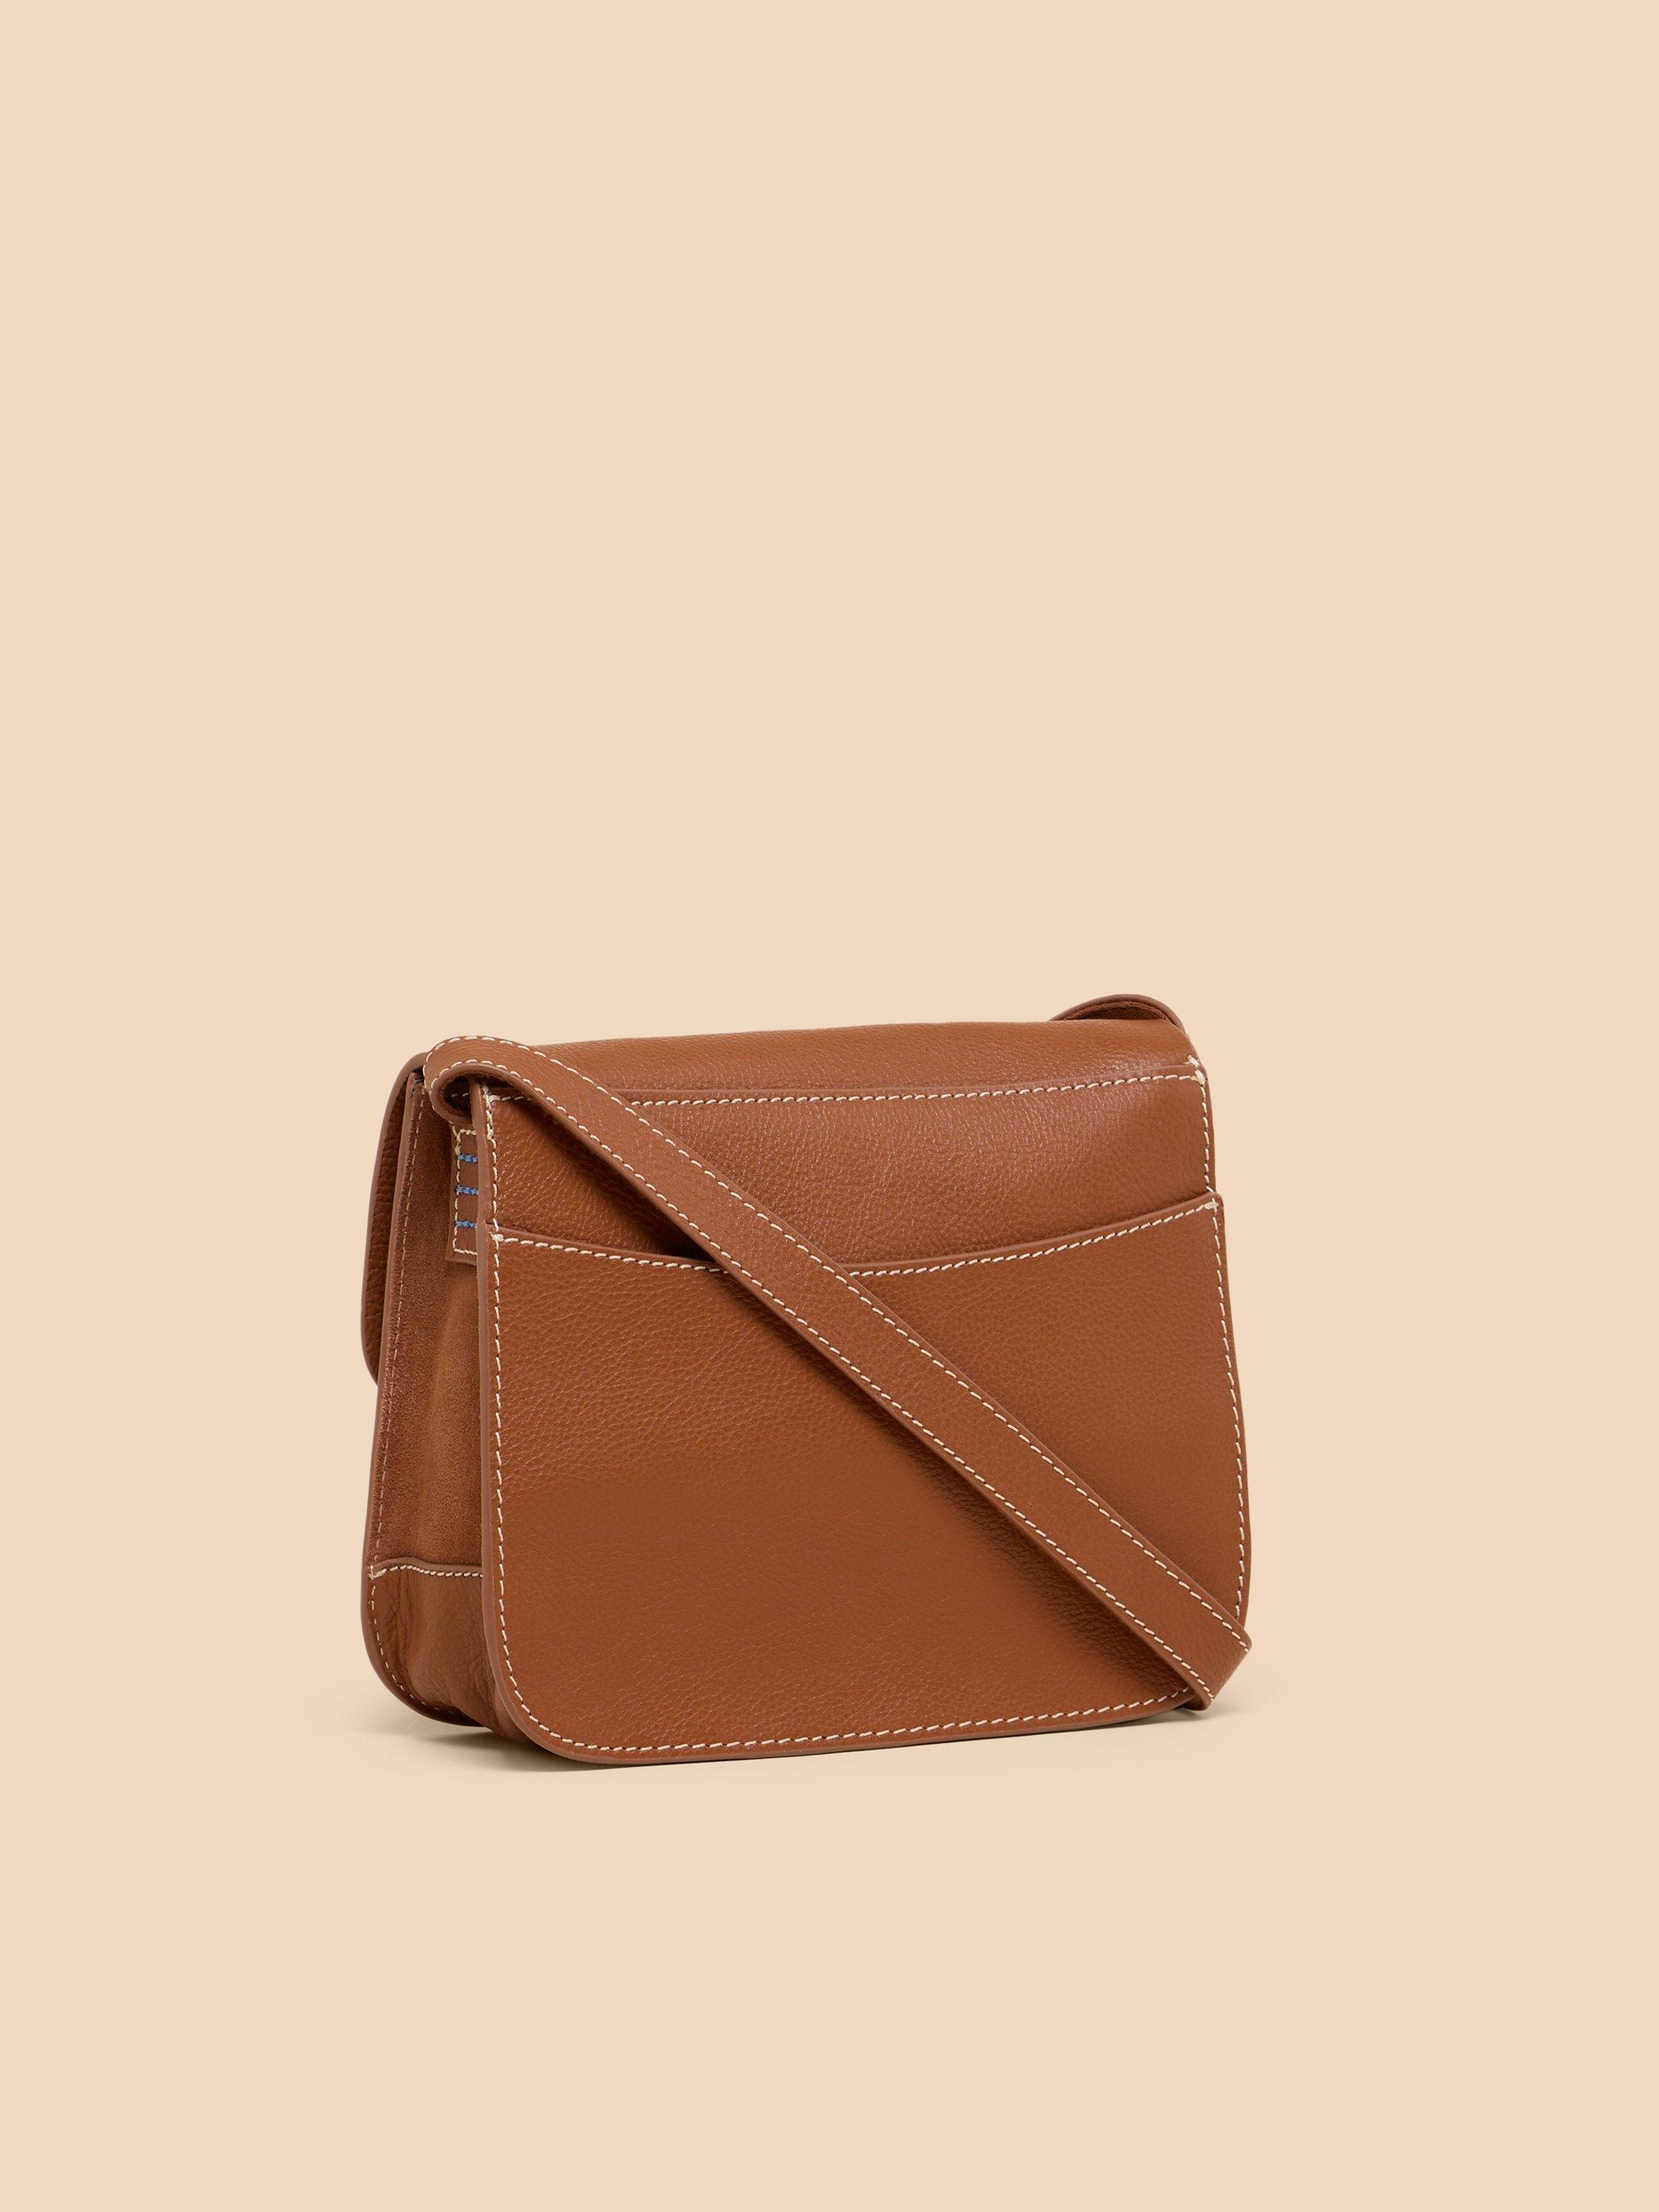 Evie Leather Satchel in MID TAN - FLAT BACK